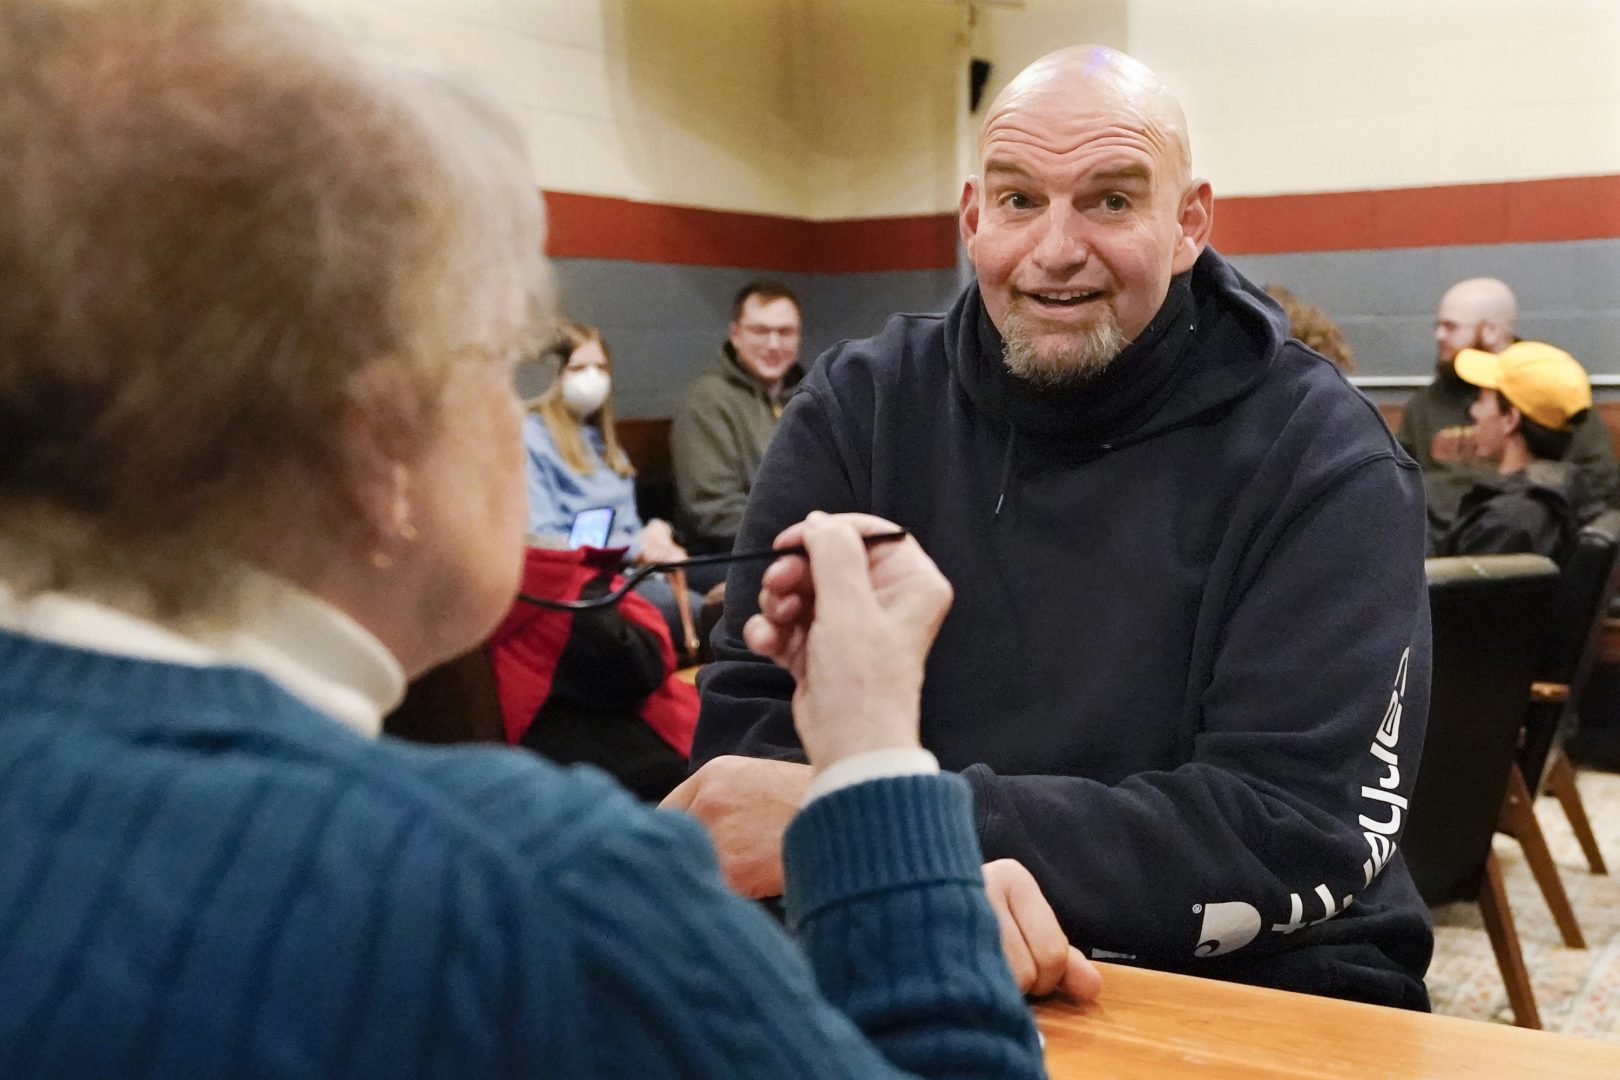 Democratic candidate for the Pennsylvania U.S.senate seat in the 2022 primary election, Lt. Gov. John Fetterman, right, talks with Elisabeth Fulmer during a campaign stop at the Mechanistic Brewery, in Clarion, Pa., Saturday, Feb. 12, 2022. (